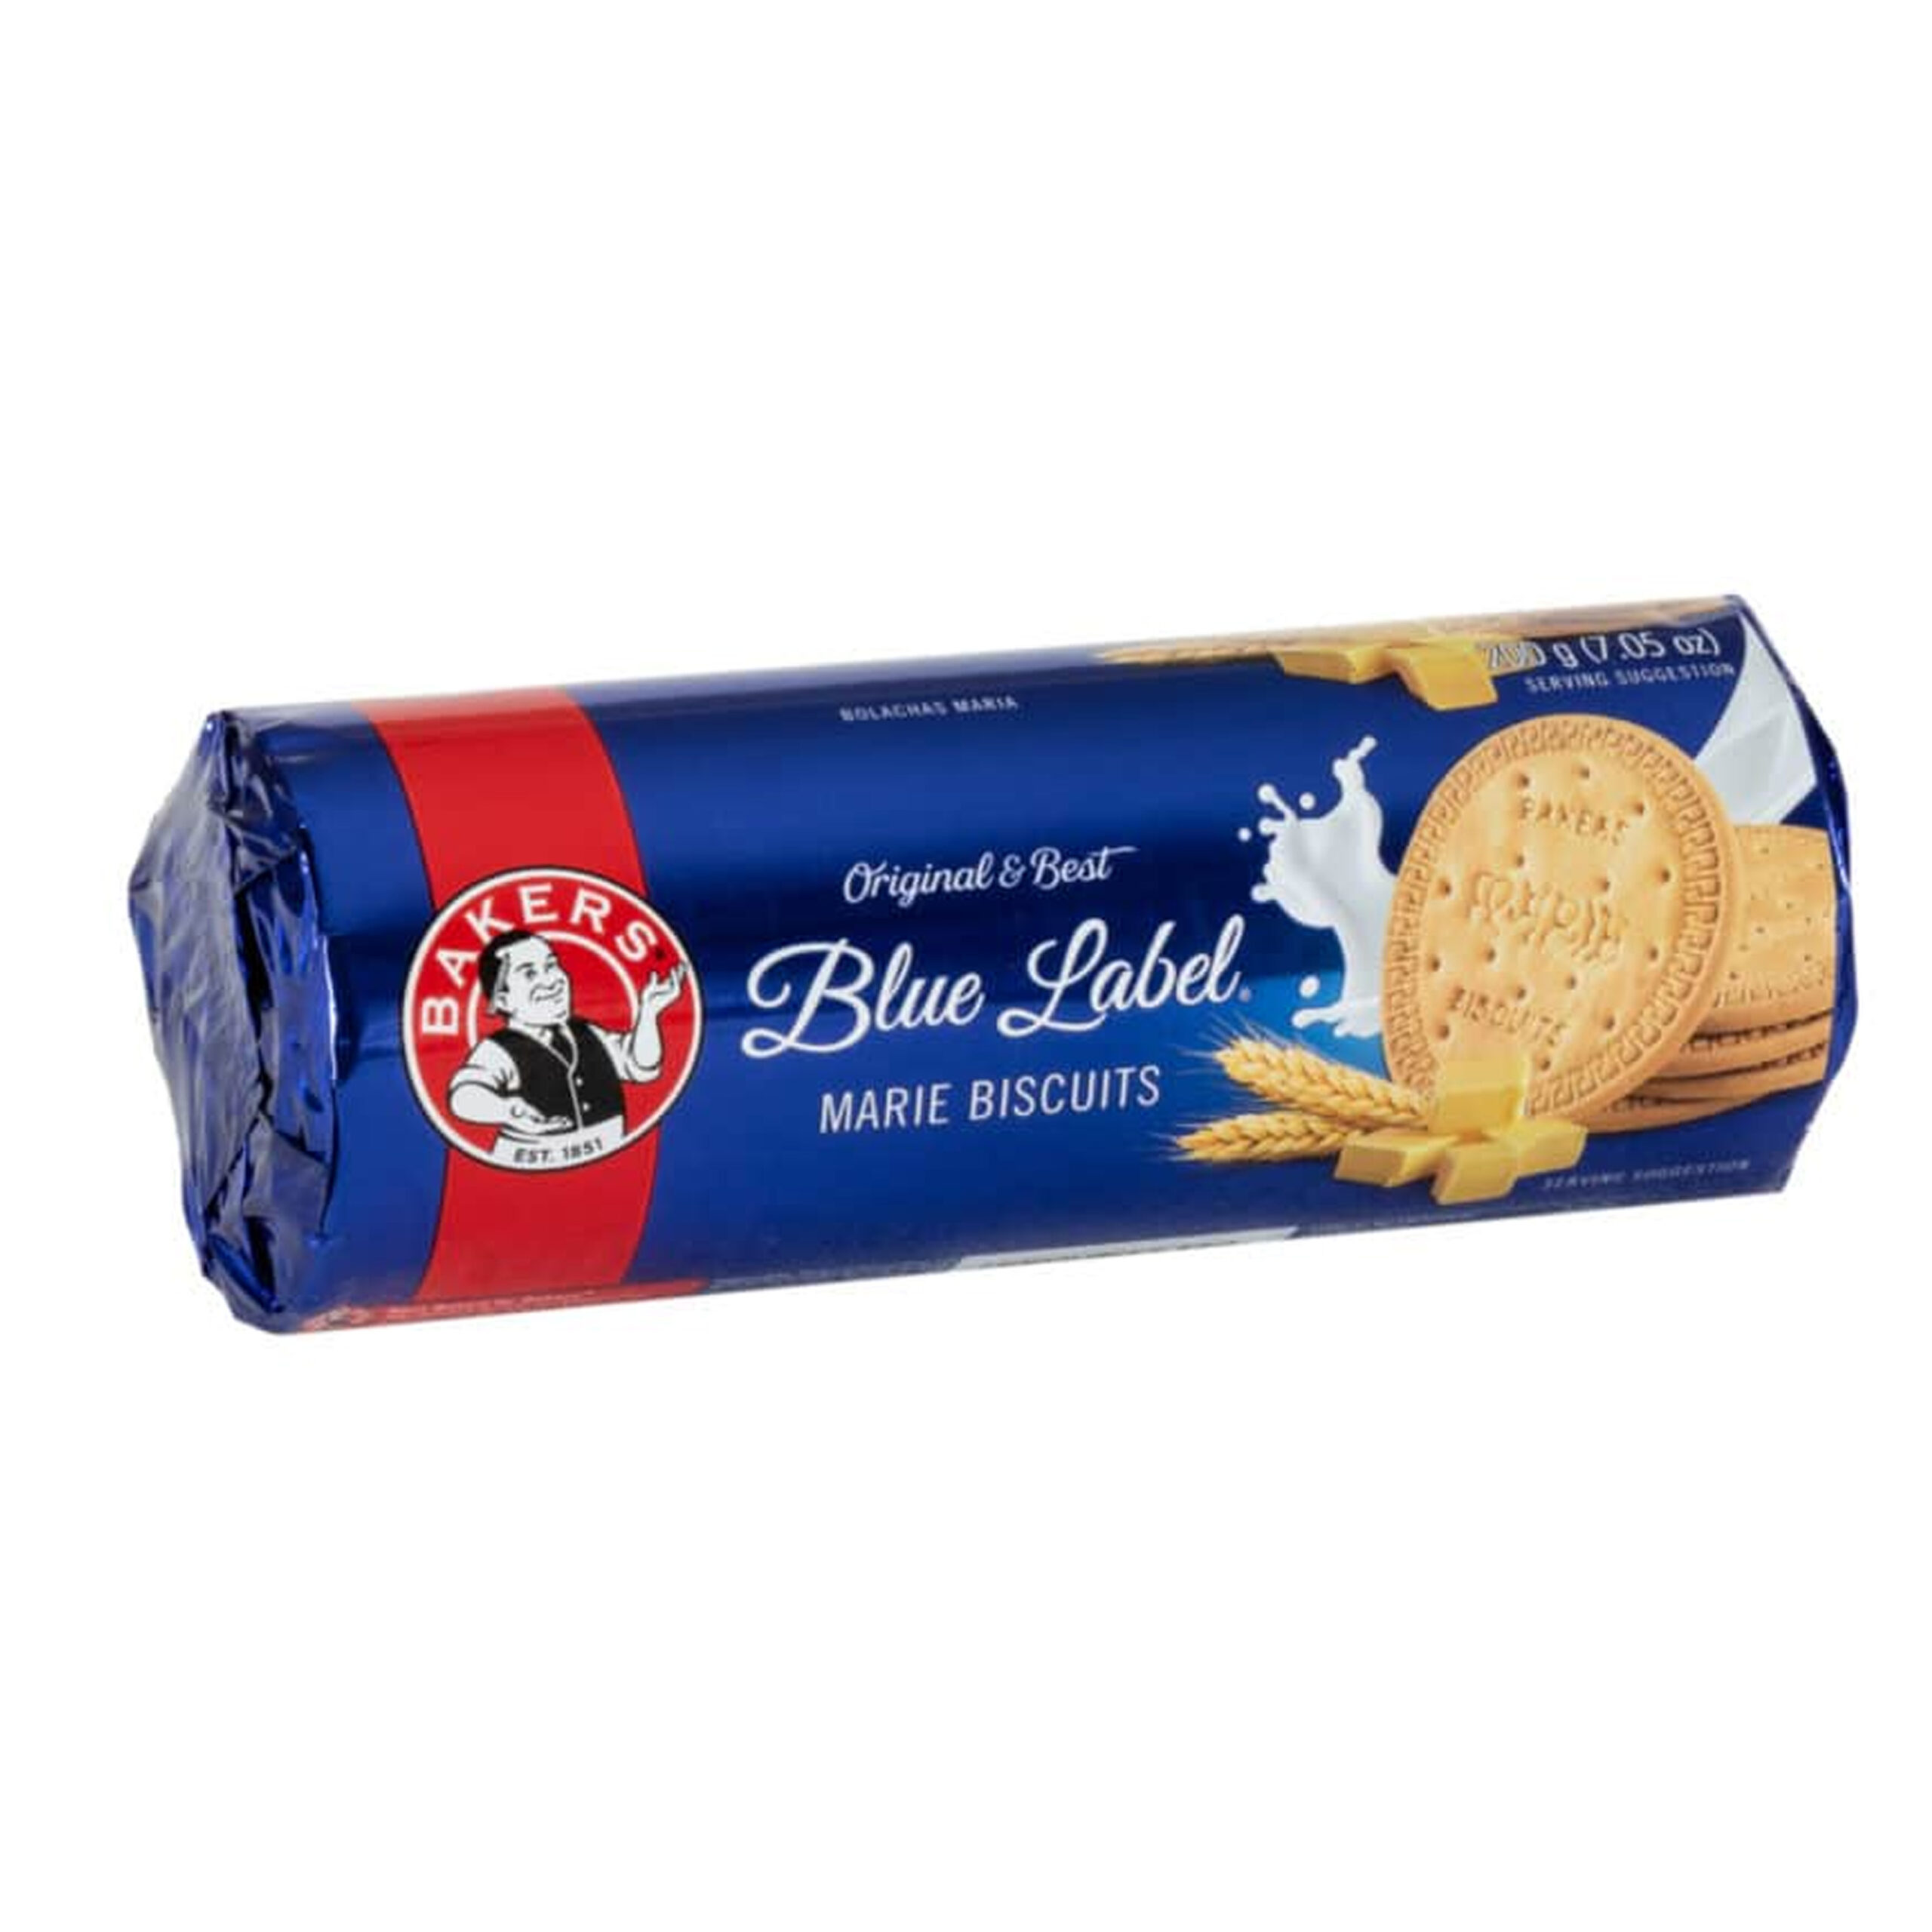 BAKERS  BLUE
LABEL MARIE
BISCUITS
ORIGINAL  200g